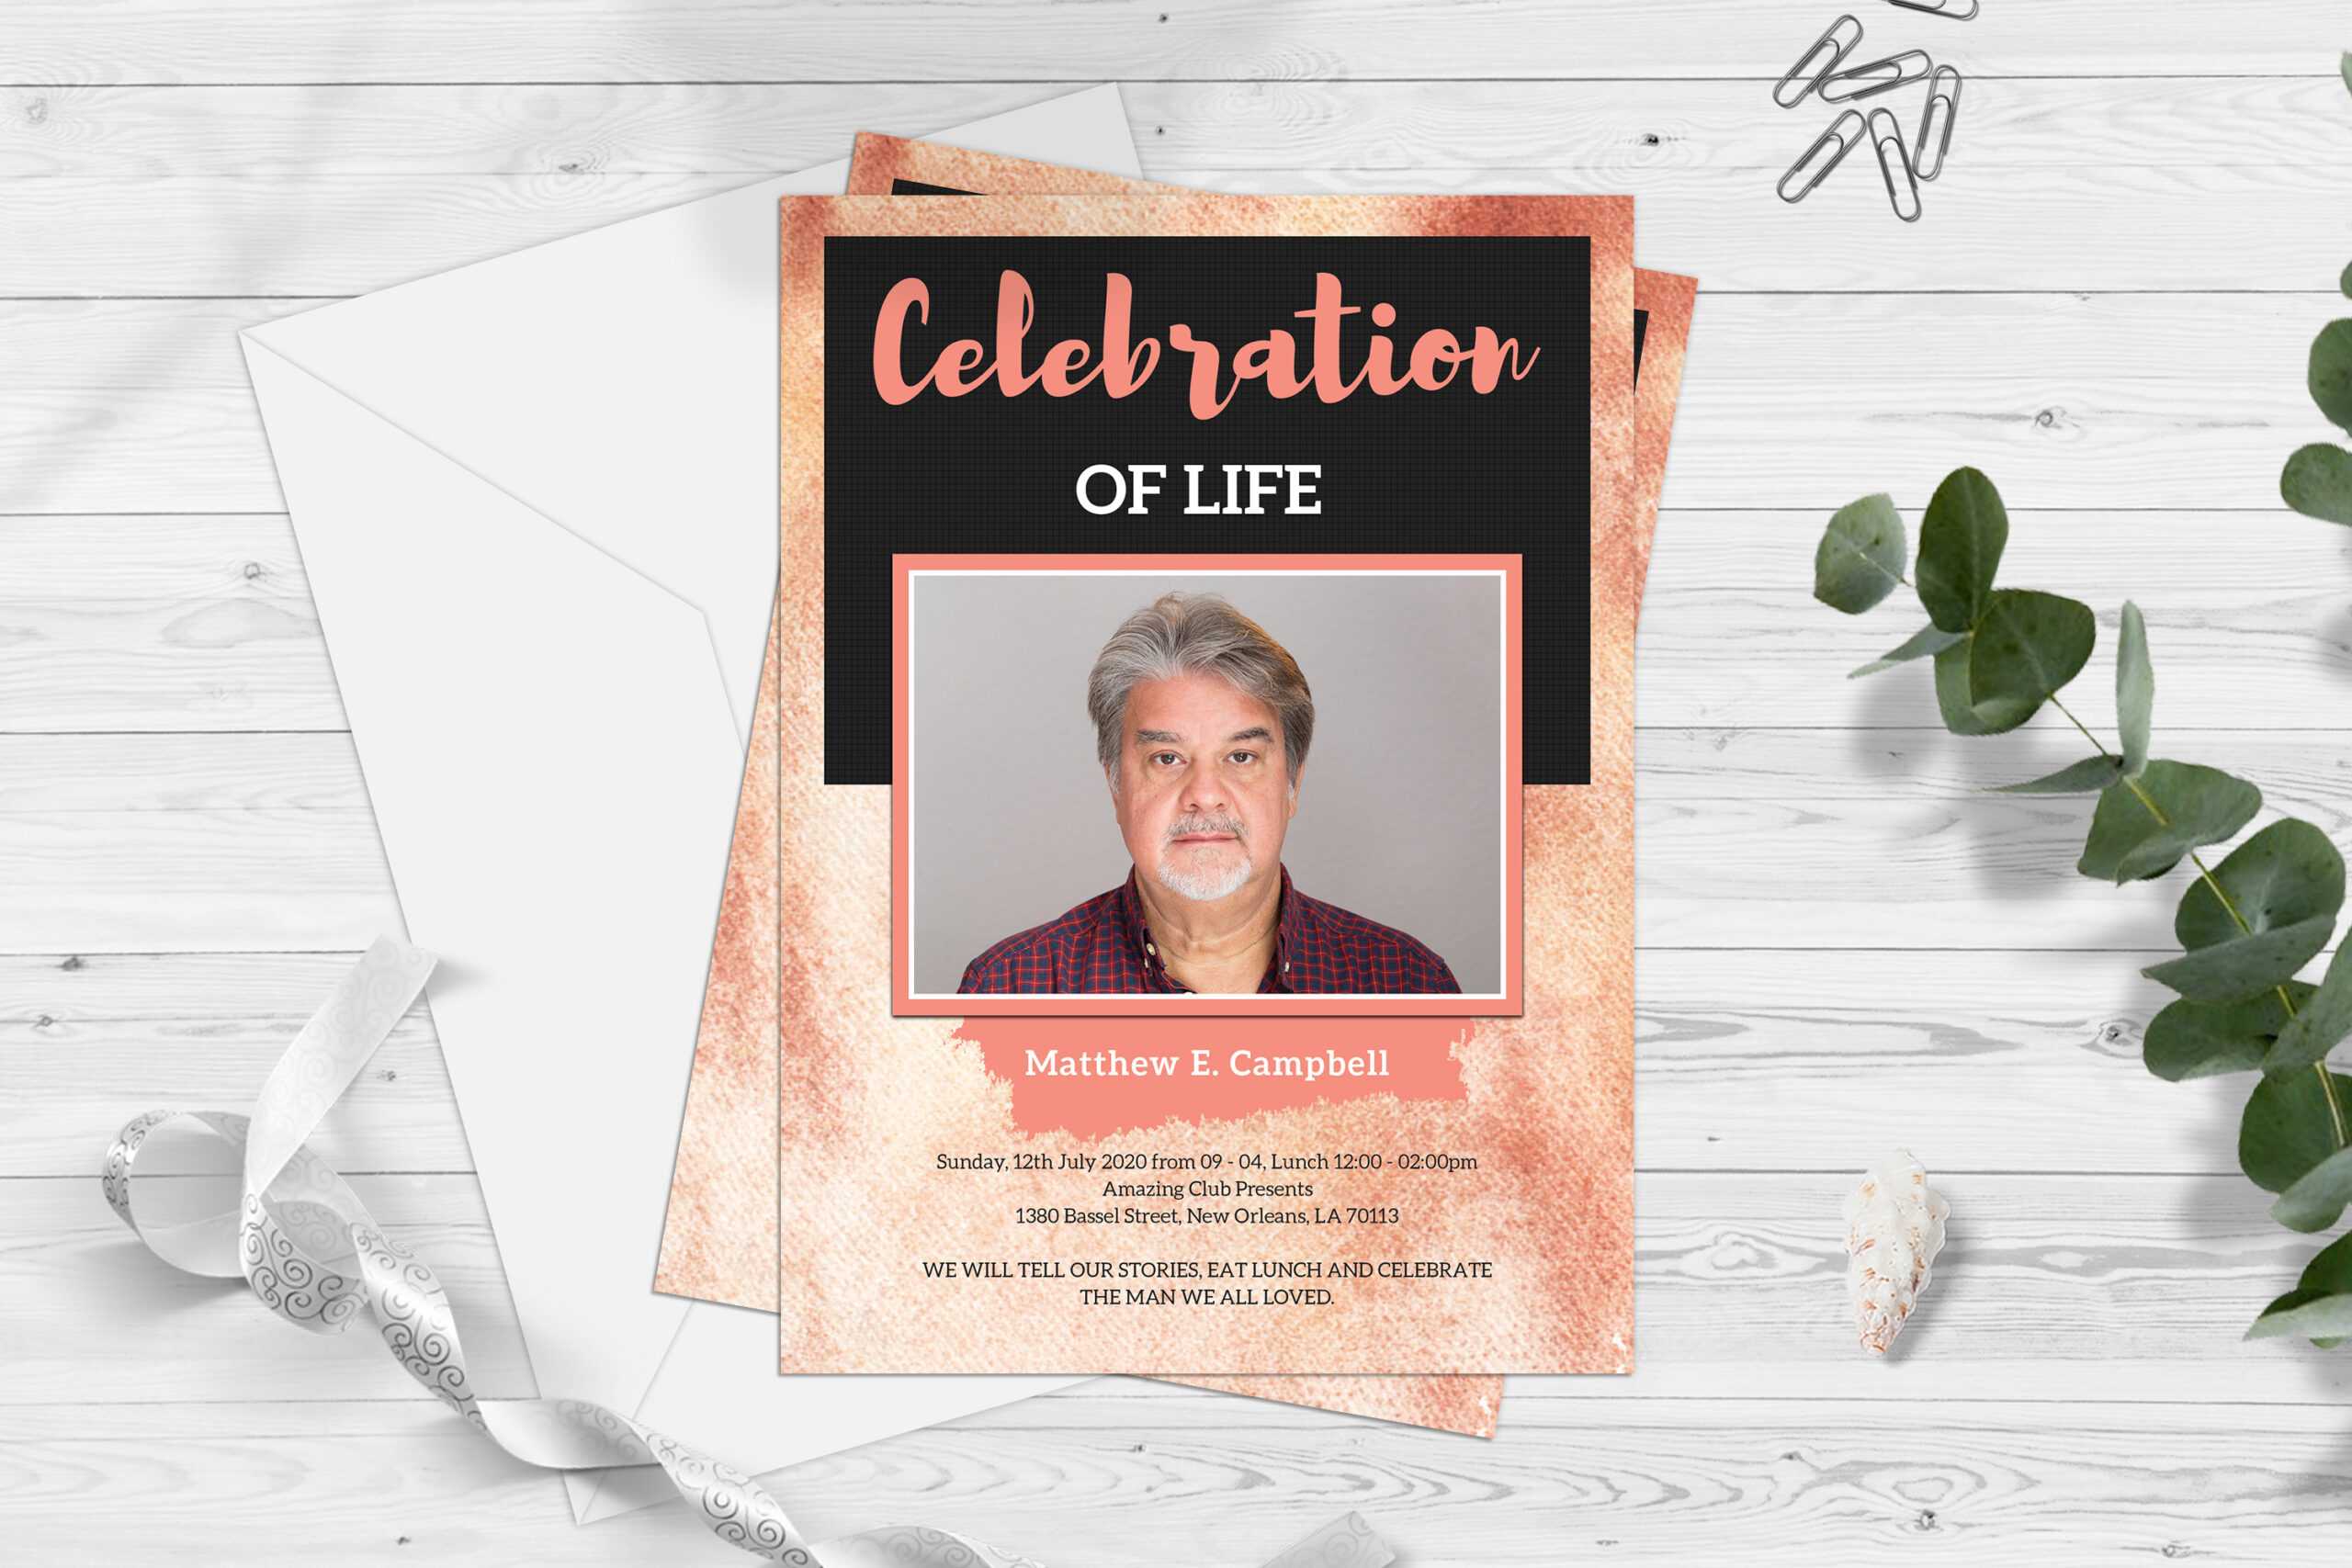 Celebration Of Life Funeral Program Invitation Card Template For Remembrance Cards Template Free